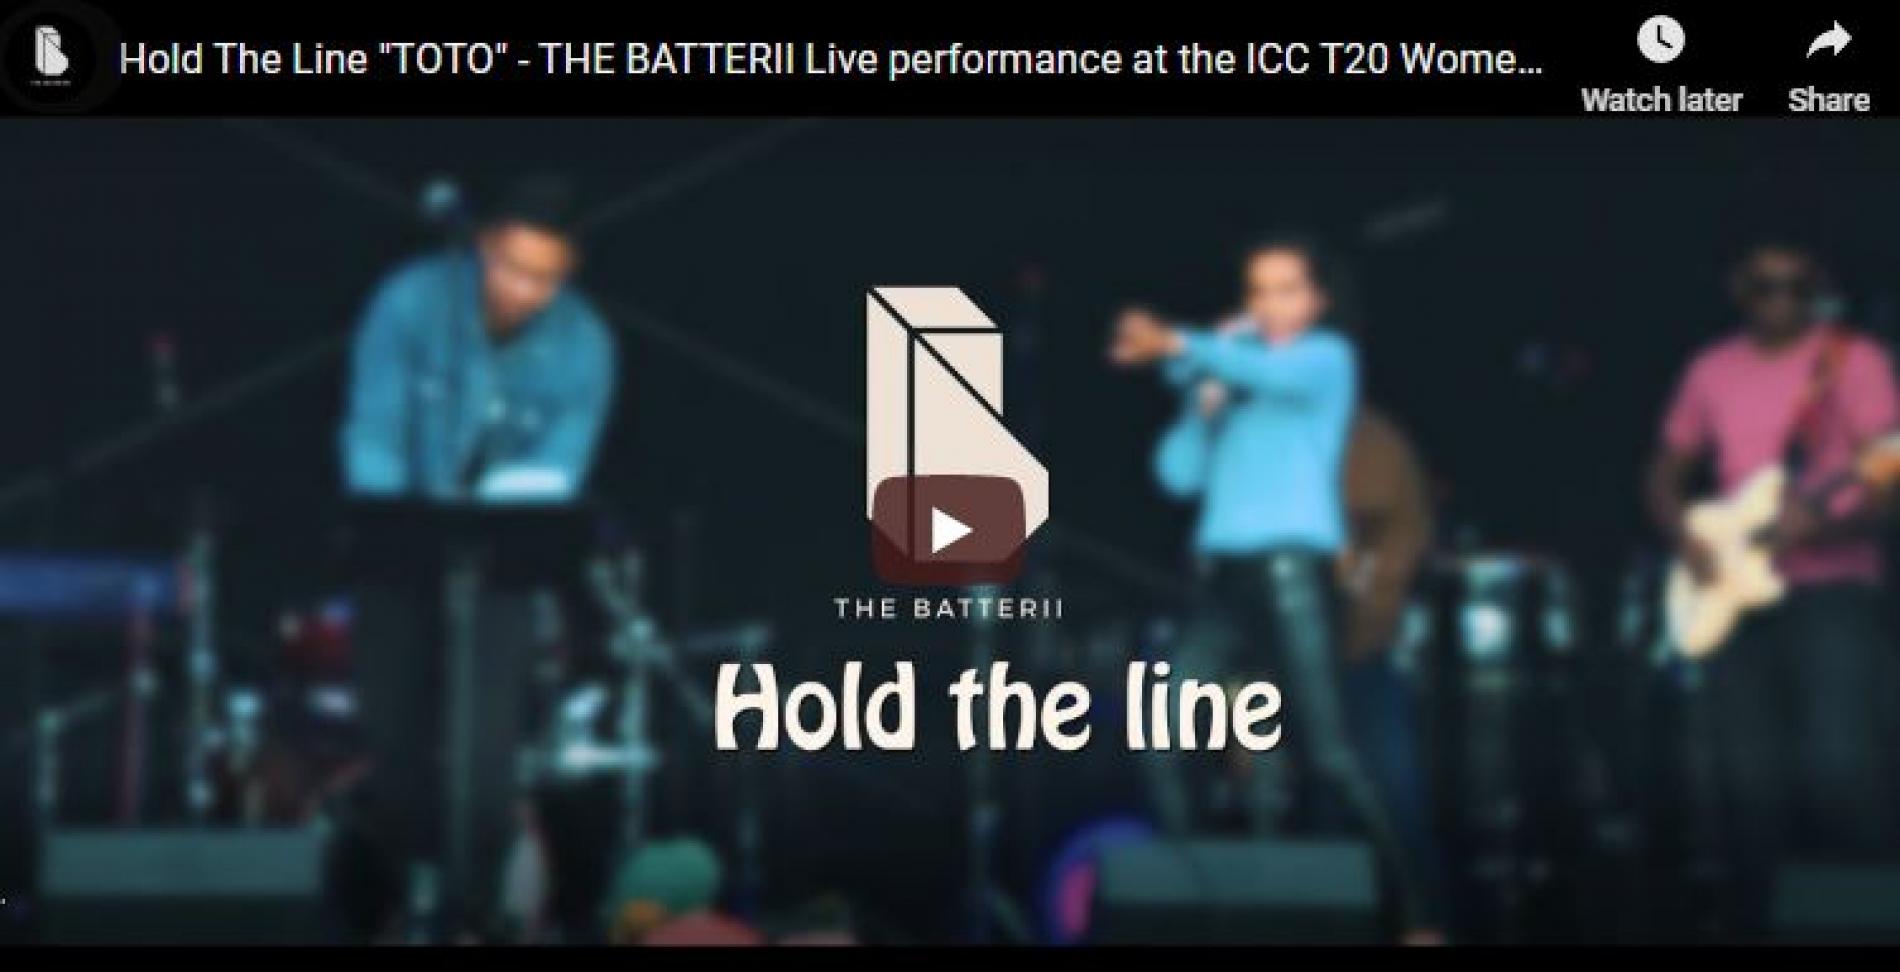 Hold The Line “TOTO” – THE BATTERII Live performance at the ICC T20 Women’s World Cup Australia 2020